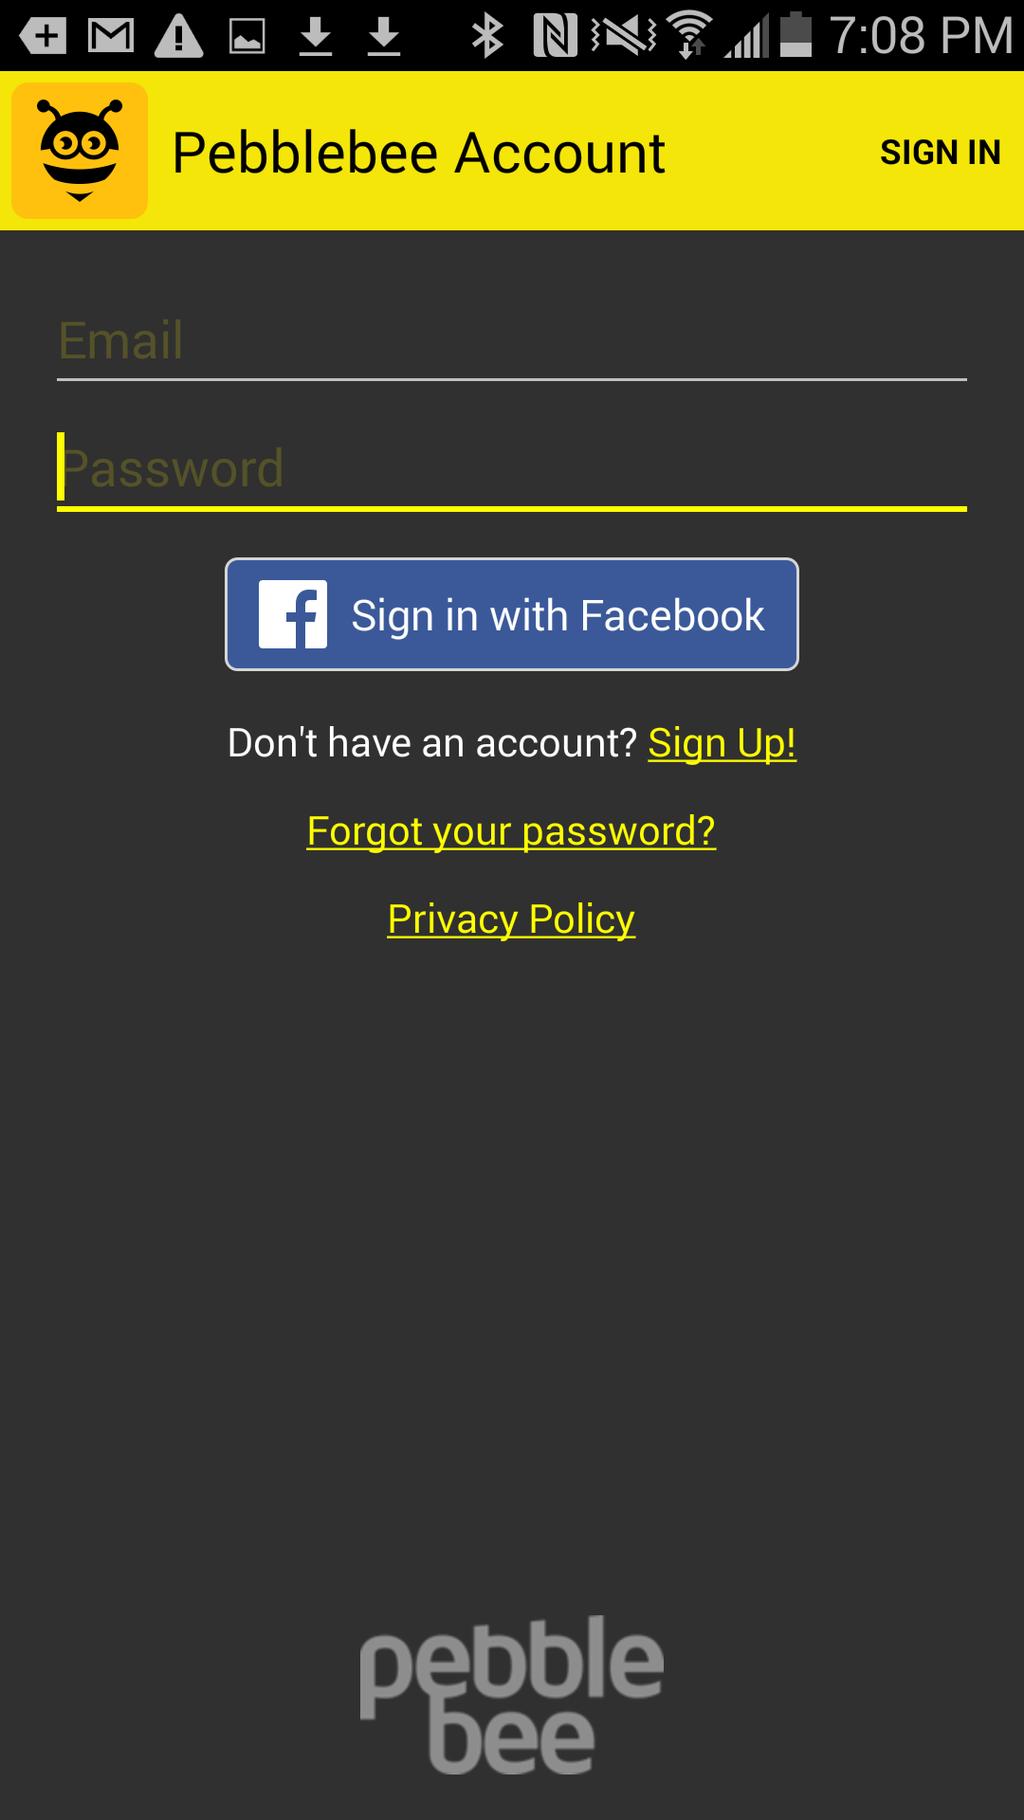 Creating and Signing-In to your Account: Login with your existing Facebook account. (Note: If you need to reset your password, this is done directly through Facebook.com.